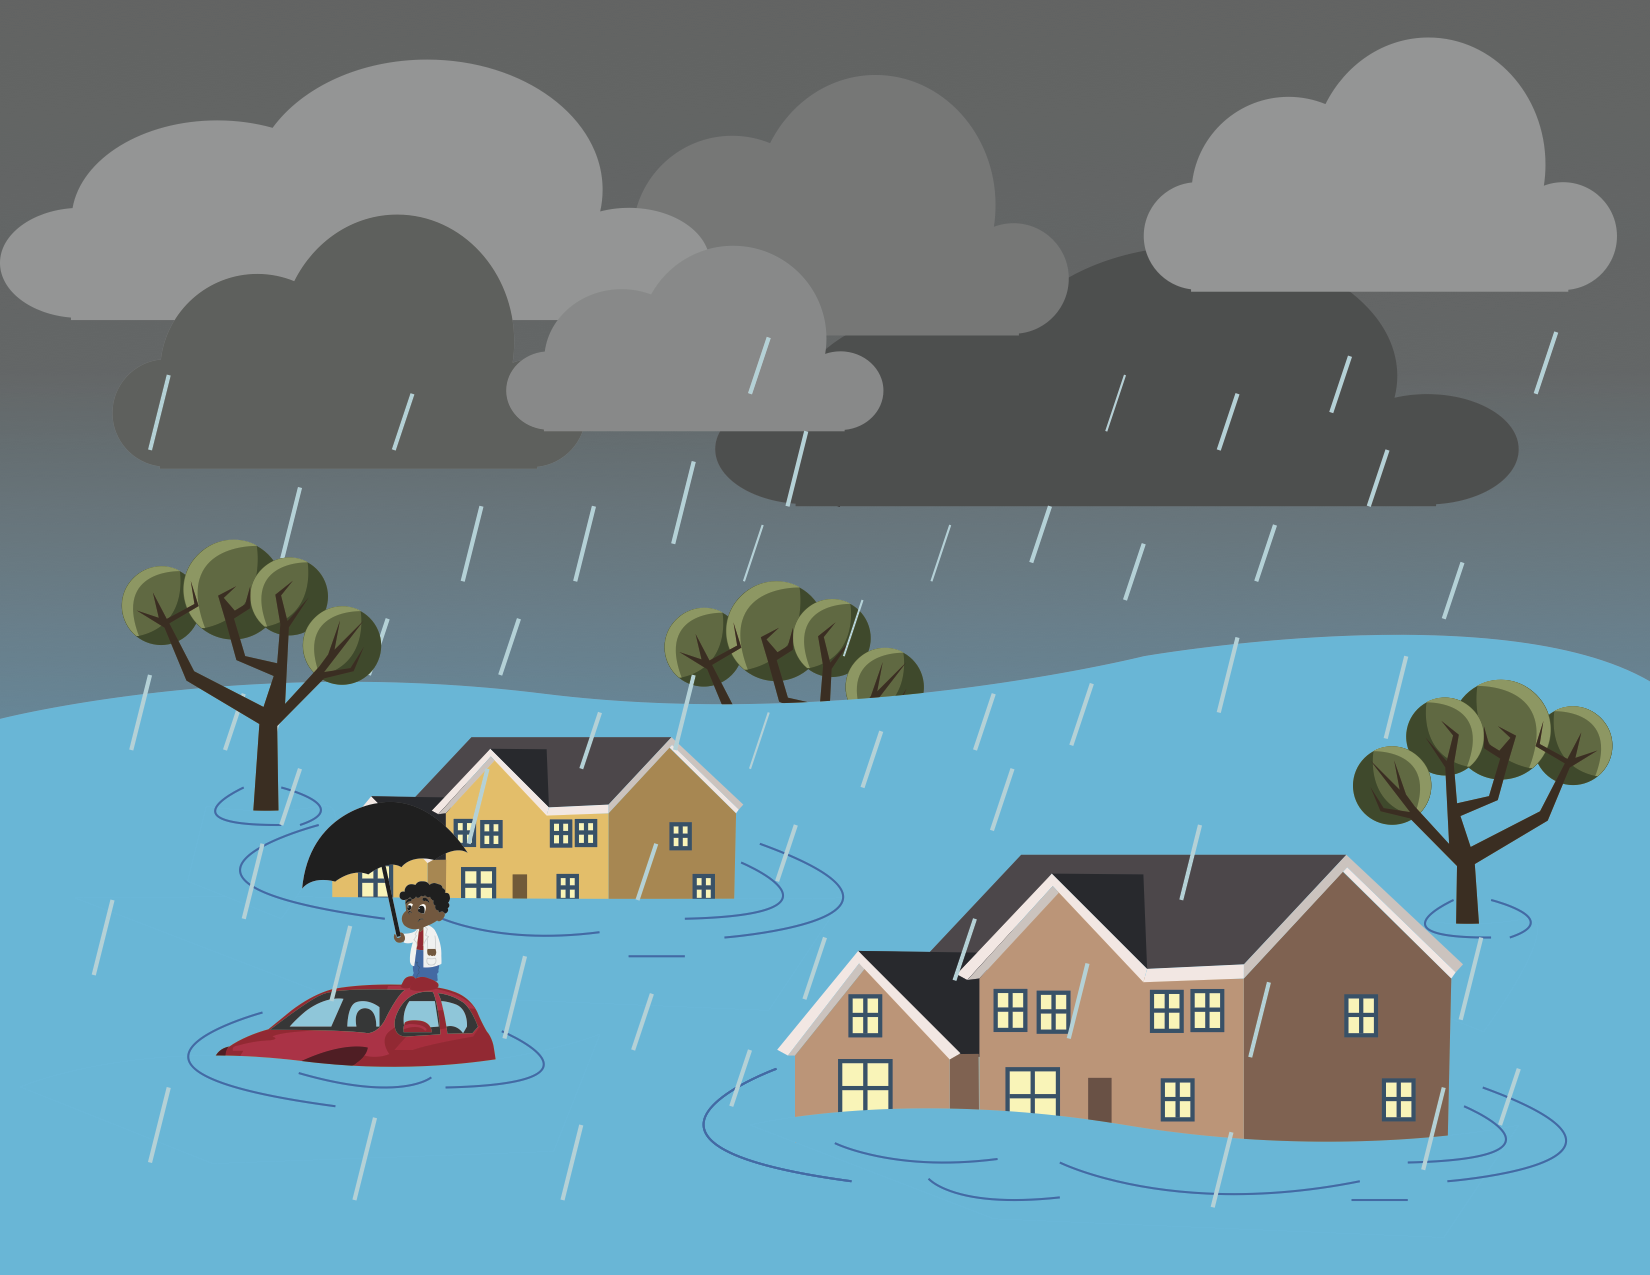 GRAPHIC: Heavy rainfall in Houston causes major flooding in low areas that is harmful and costly for Houstonians. Cartoon by The Signal reporter Aina Alleyne.